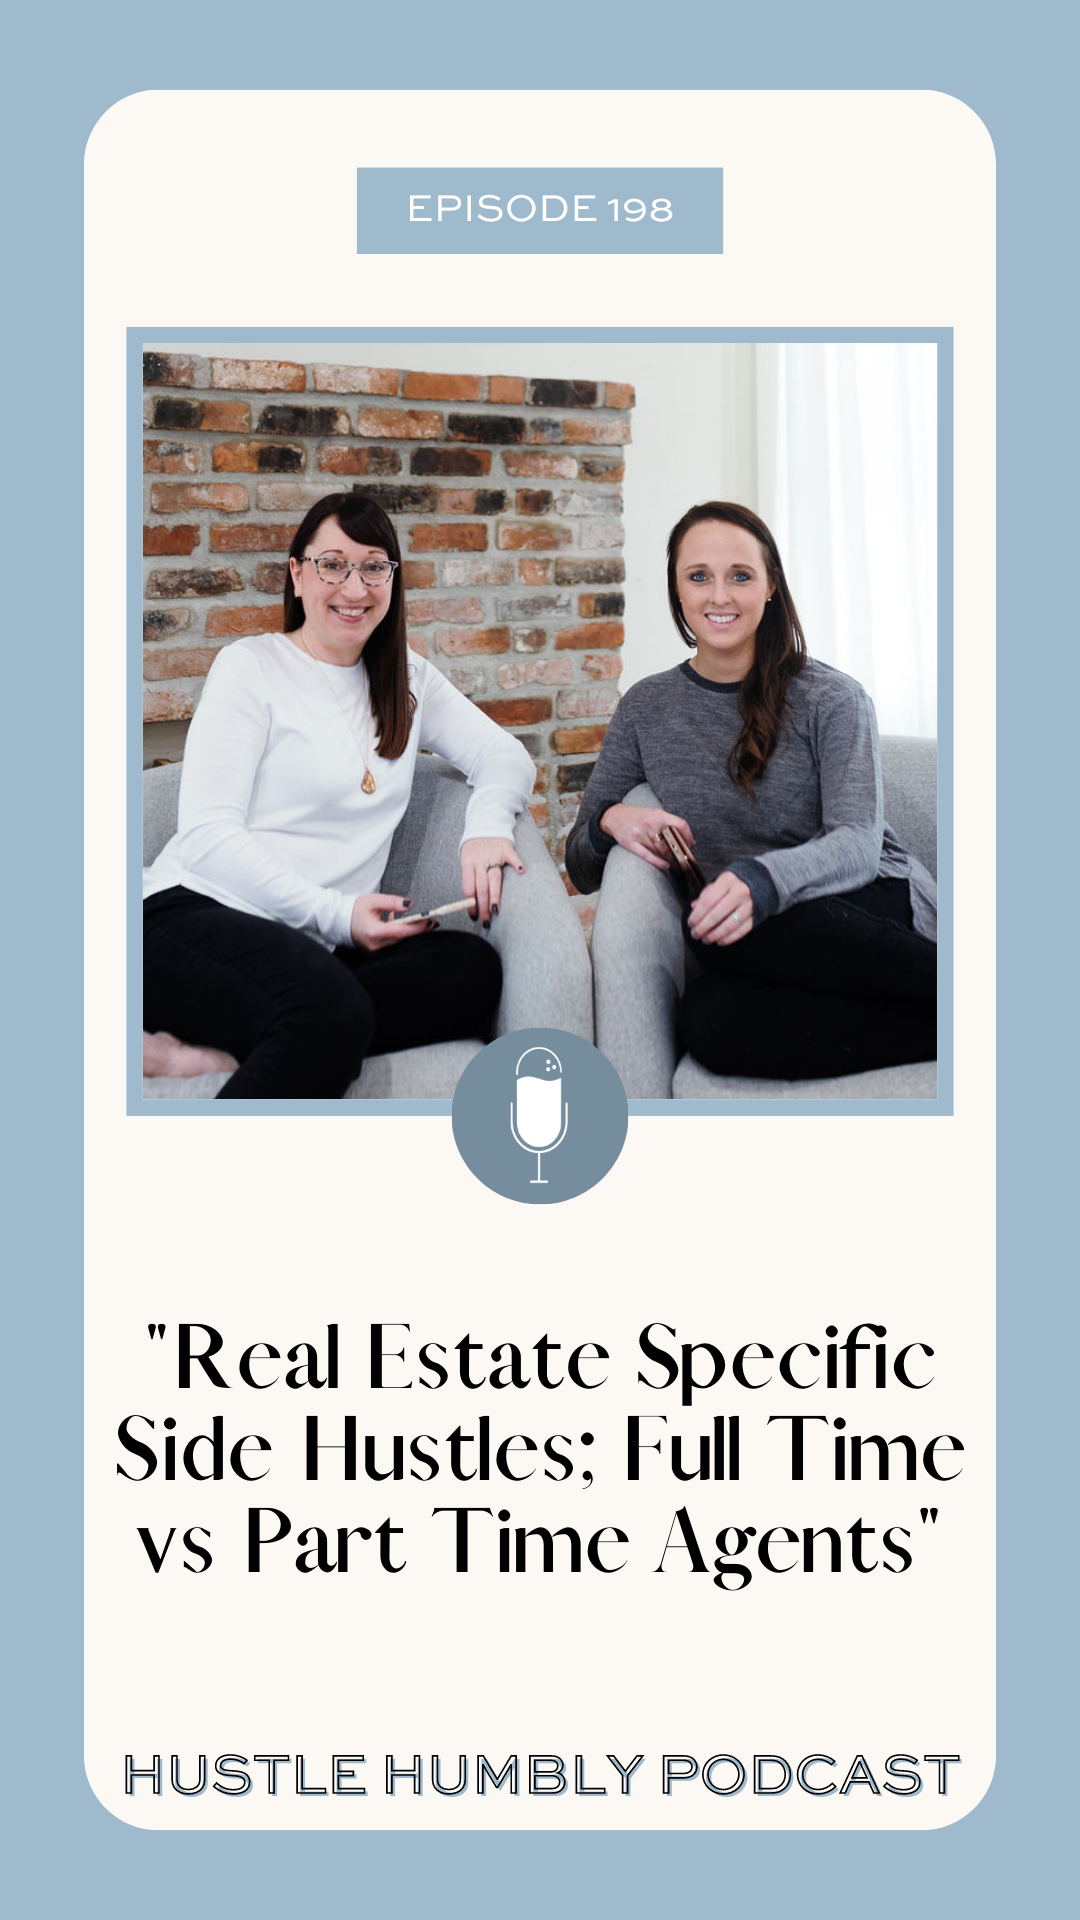 Two real estate agents discussing side hustles